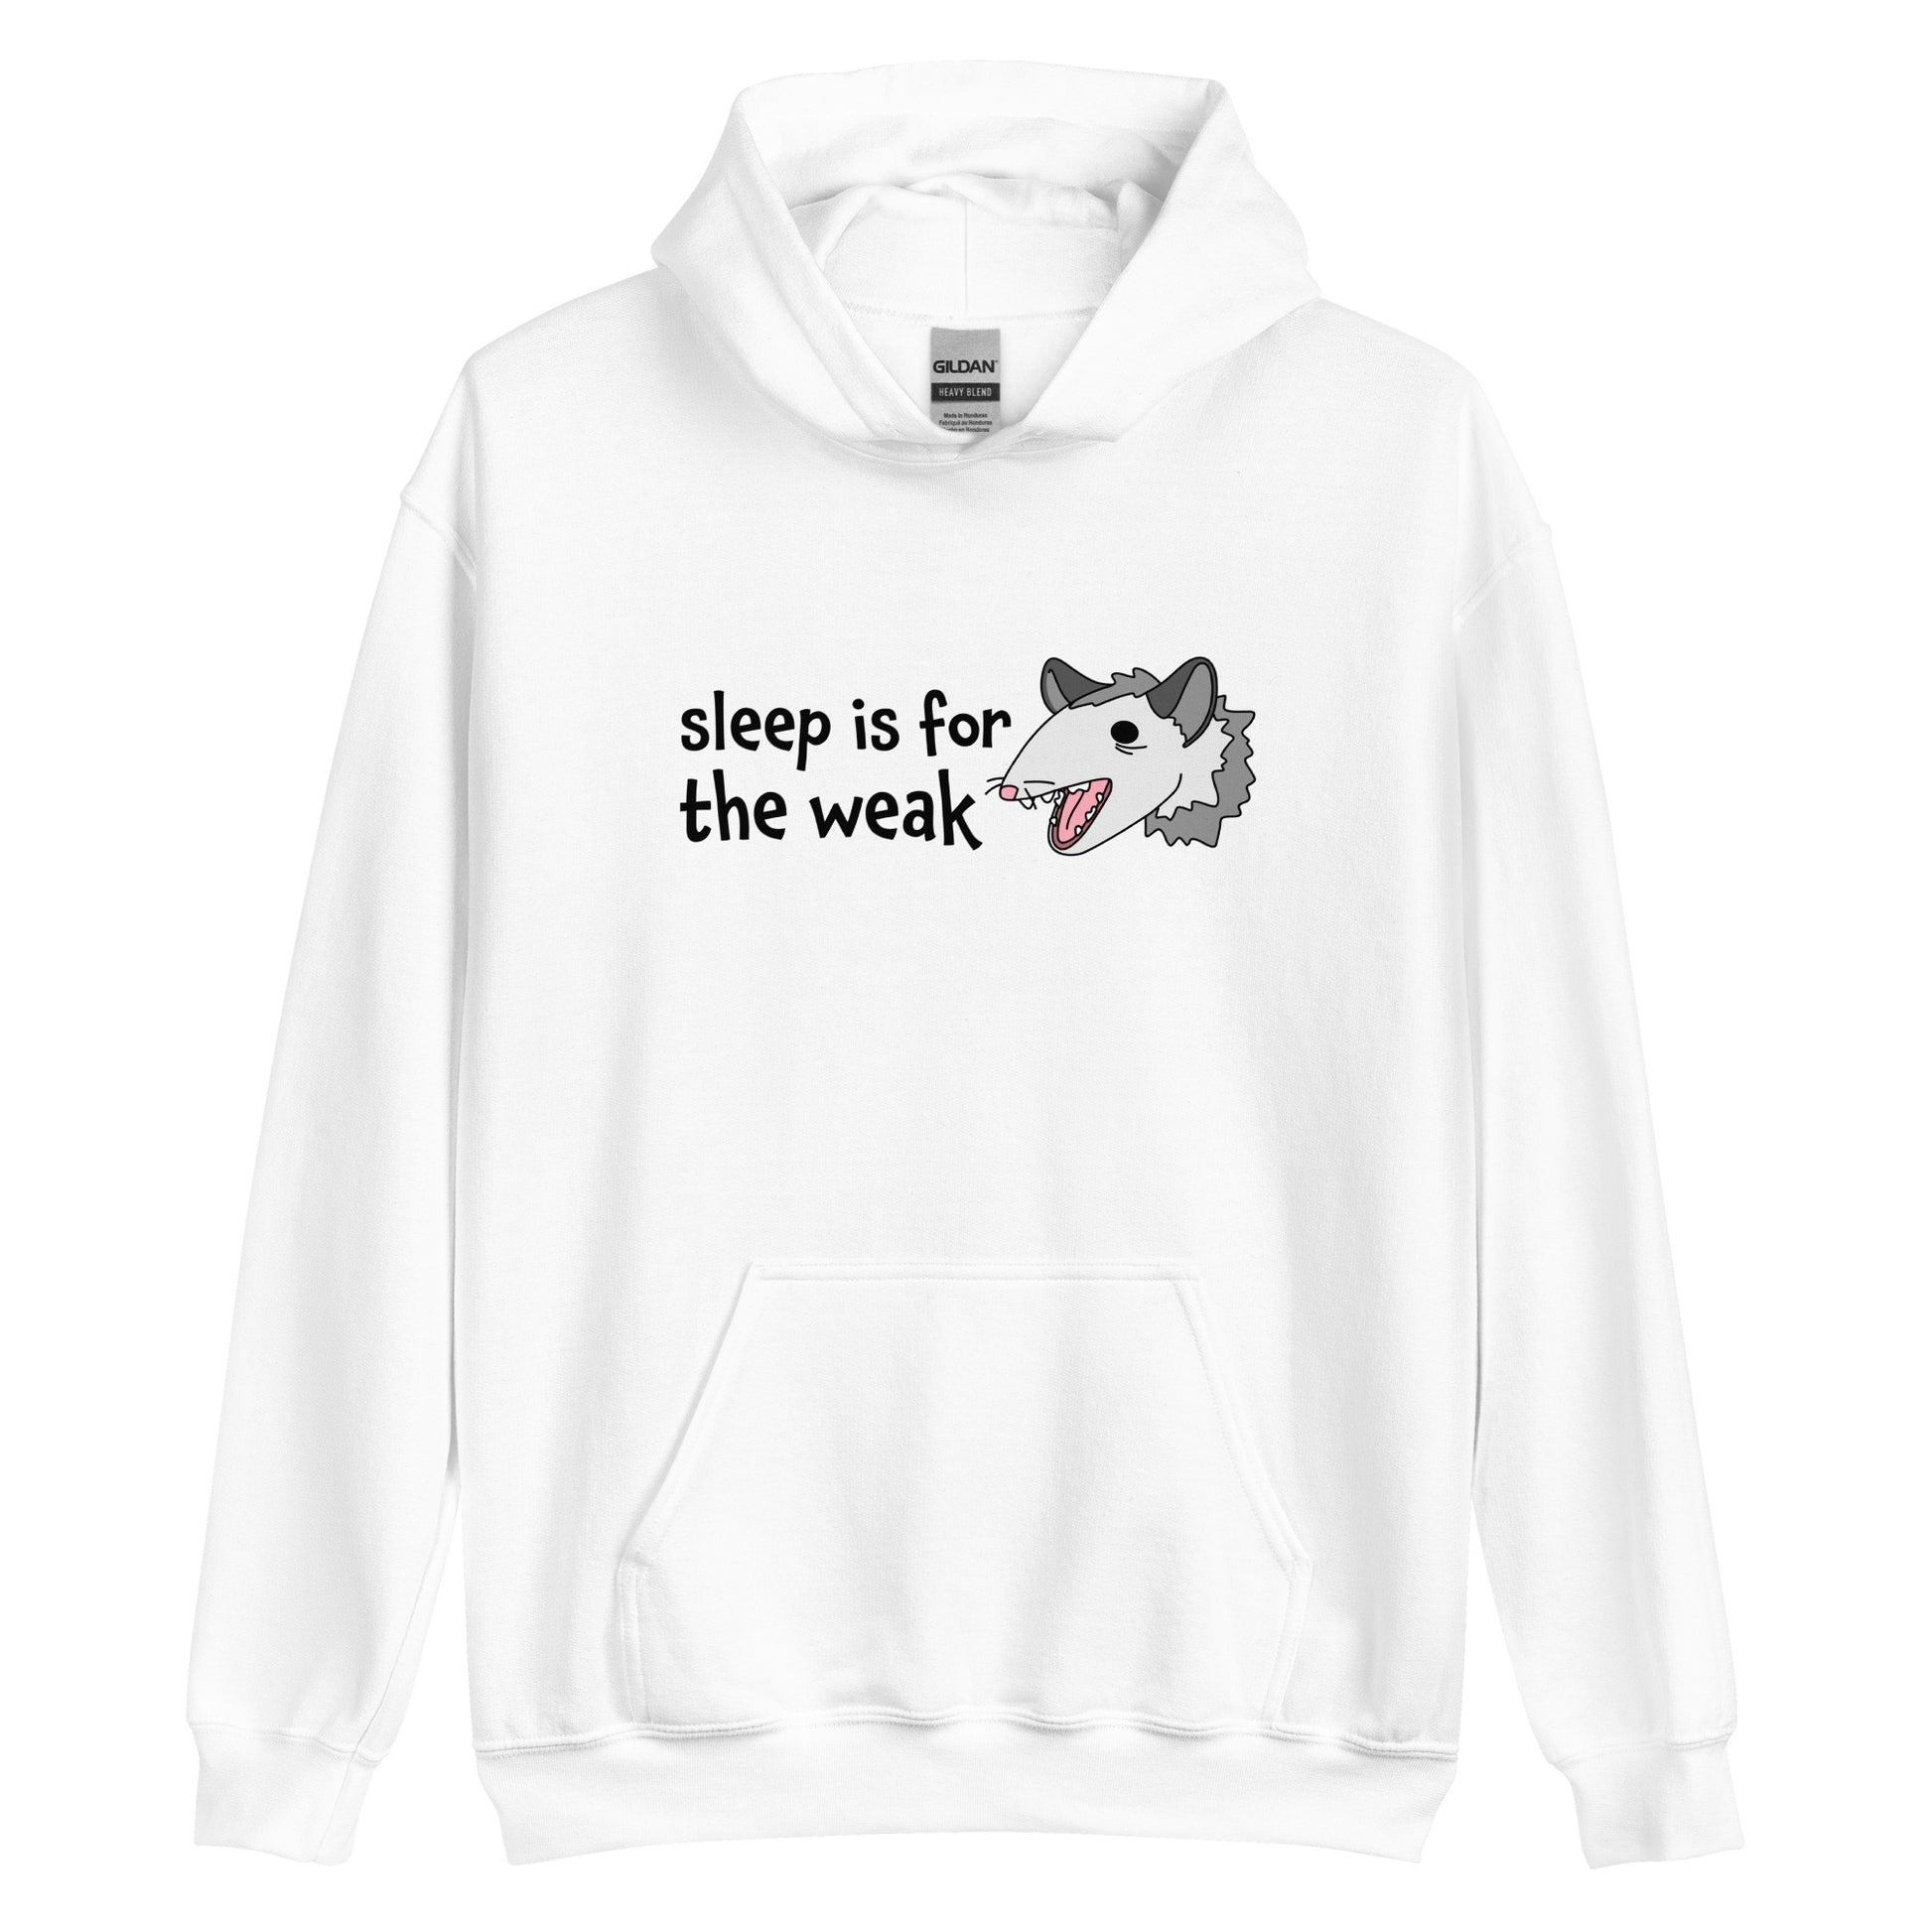 A white hooded sweatshirt featuring an illustration of an opossum with its mouth open, as if it was yelling. Text to the left of the opossum reads "sleep is for the weak"